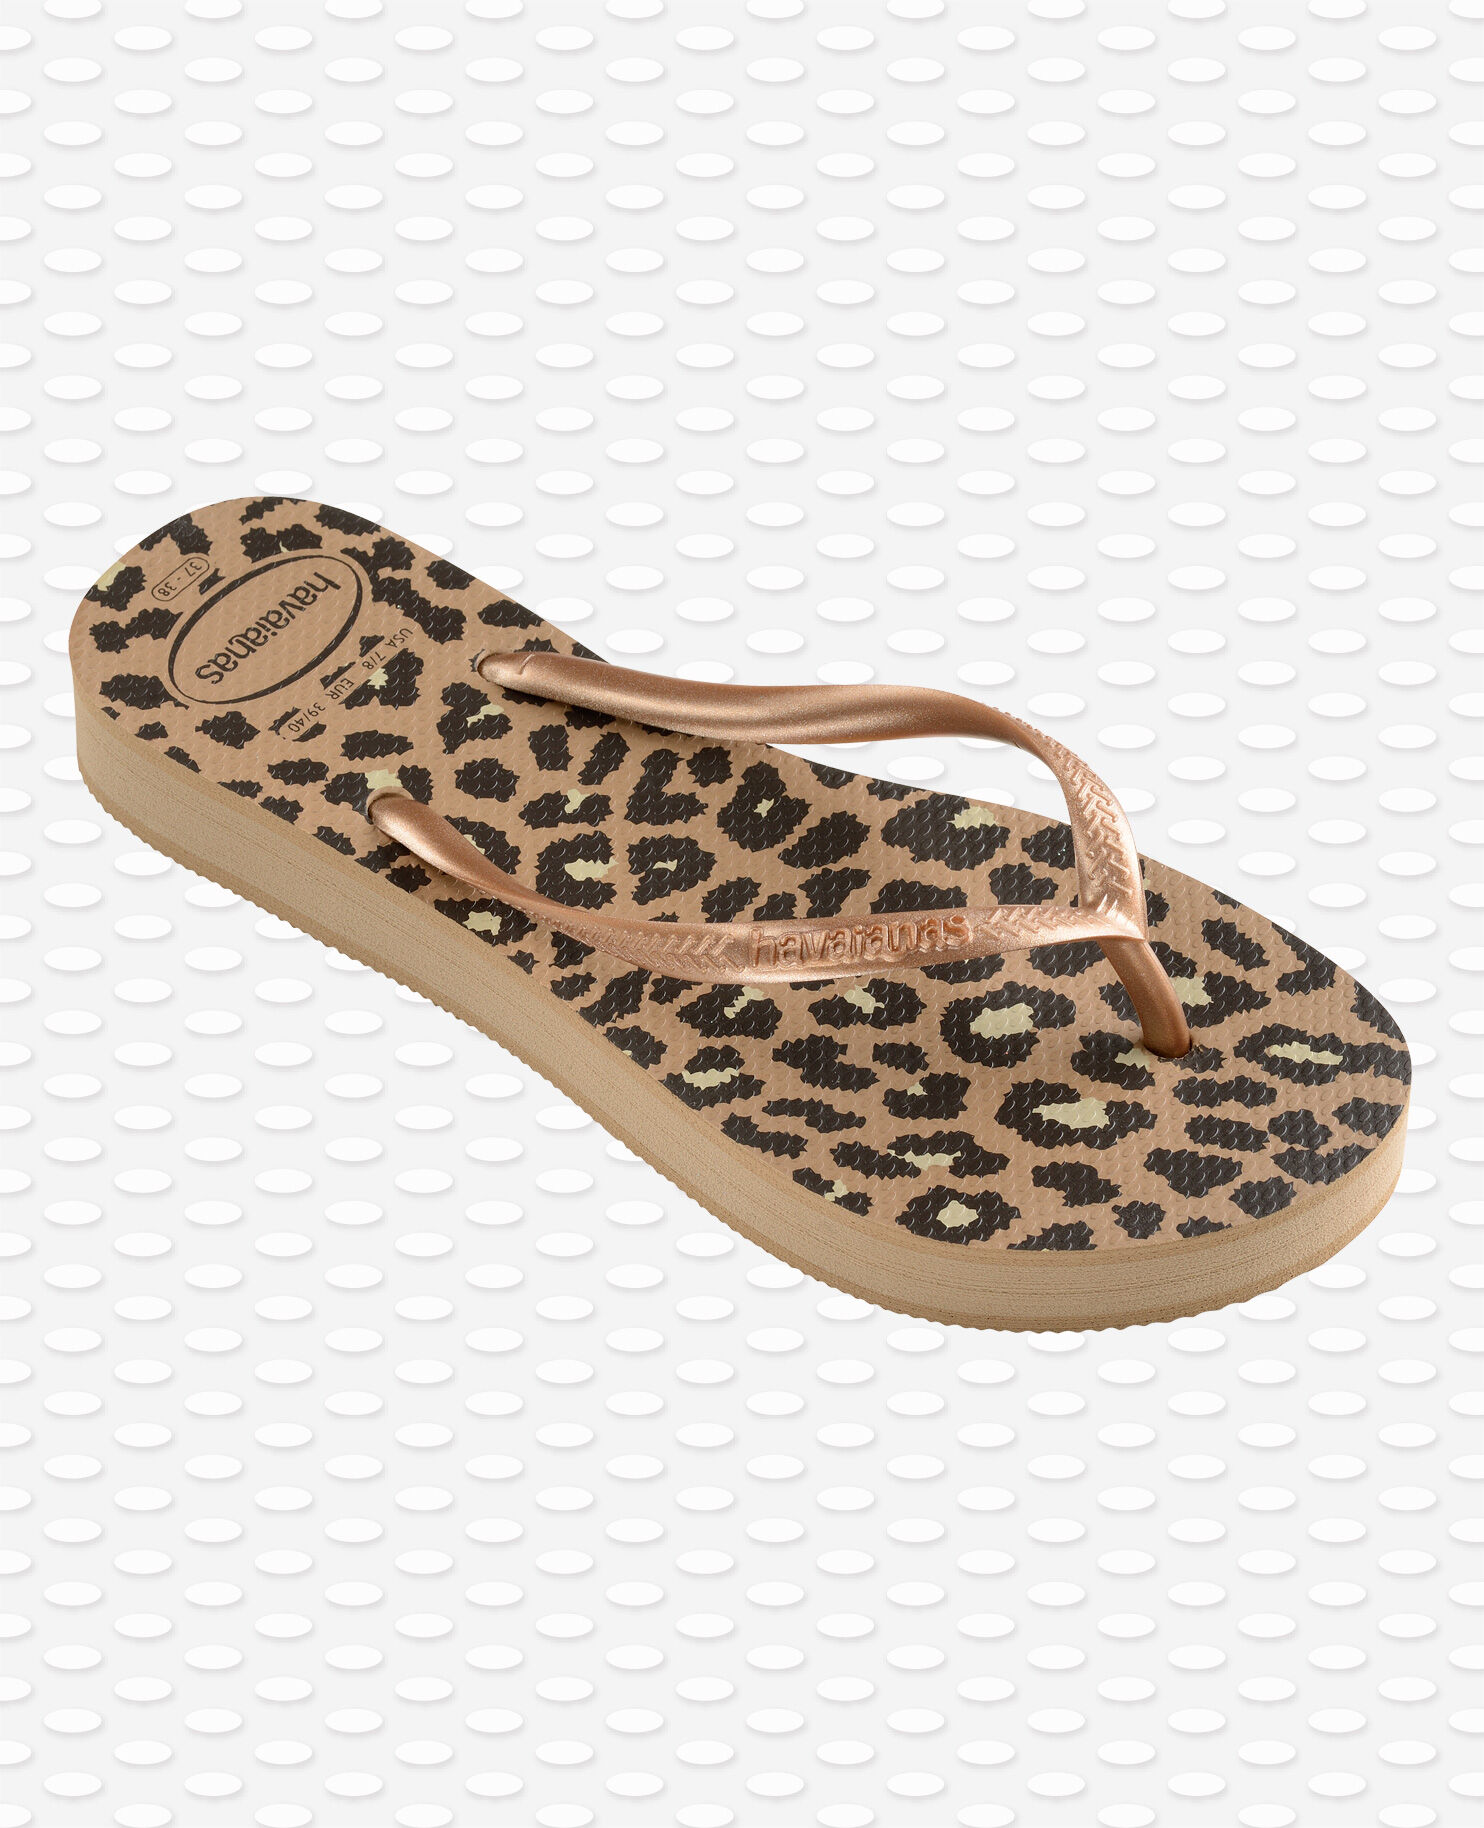 All products for Women | Havaianas® UK shop